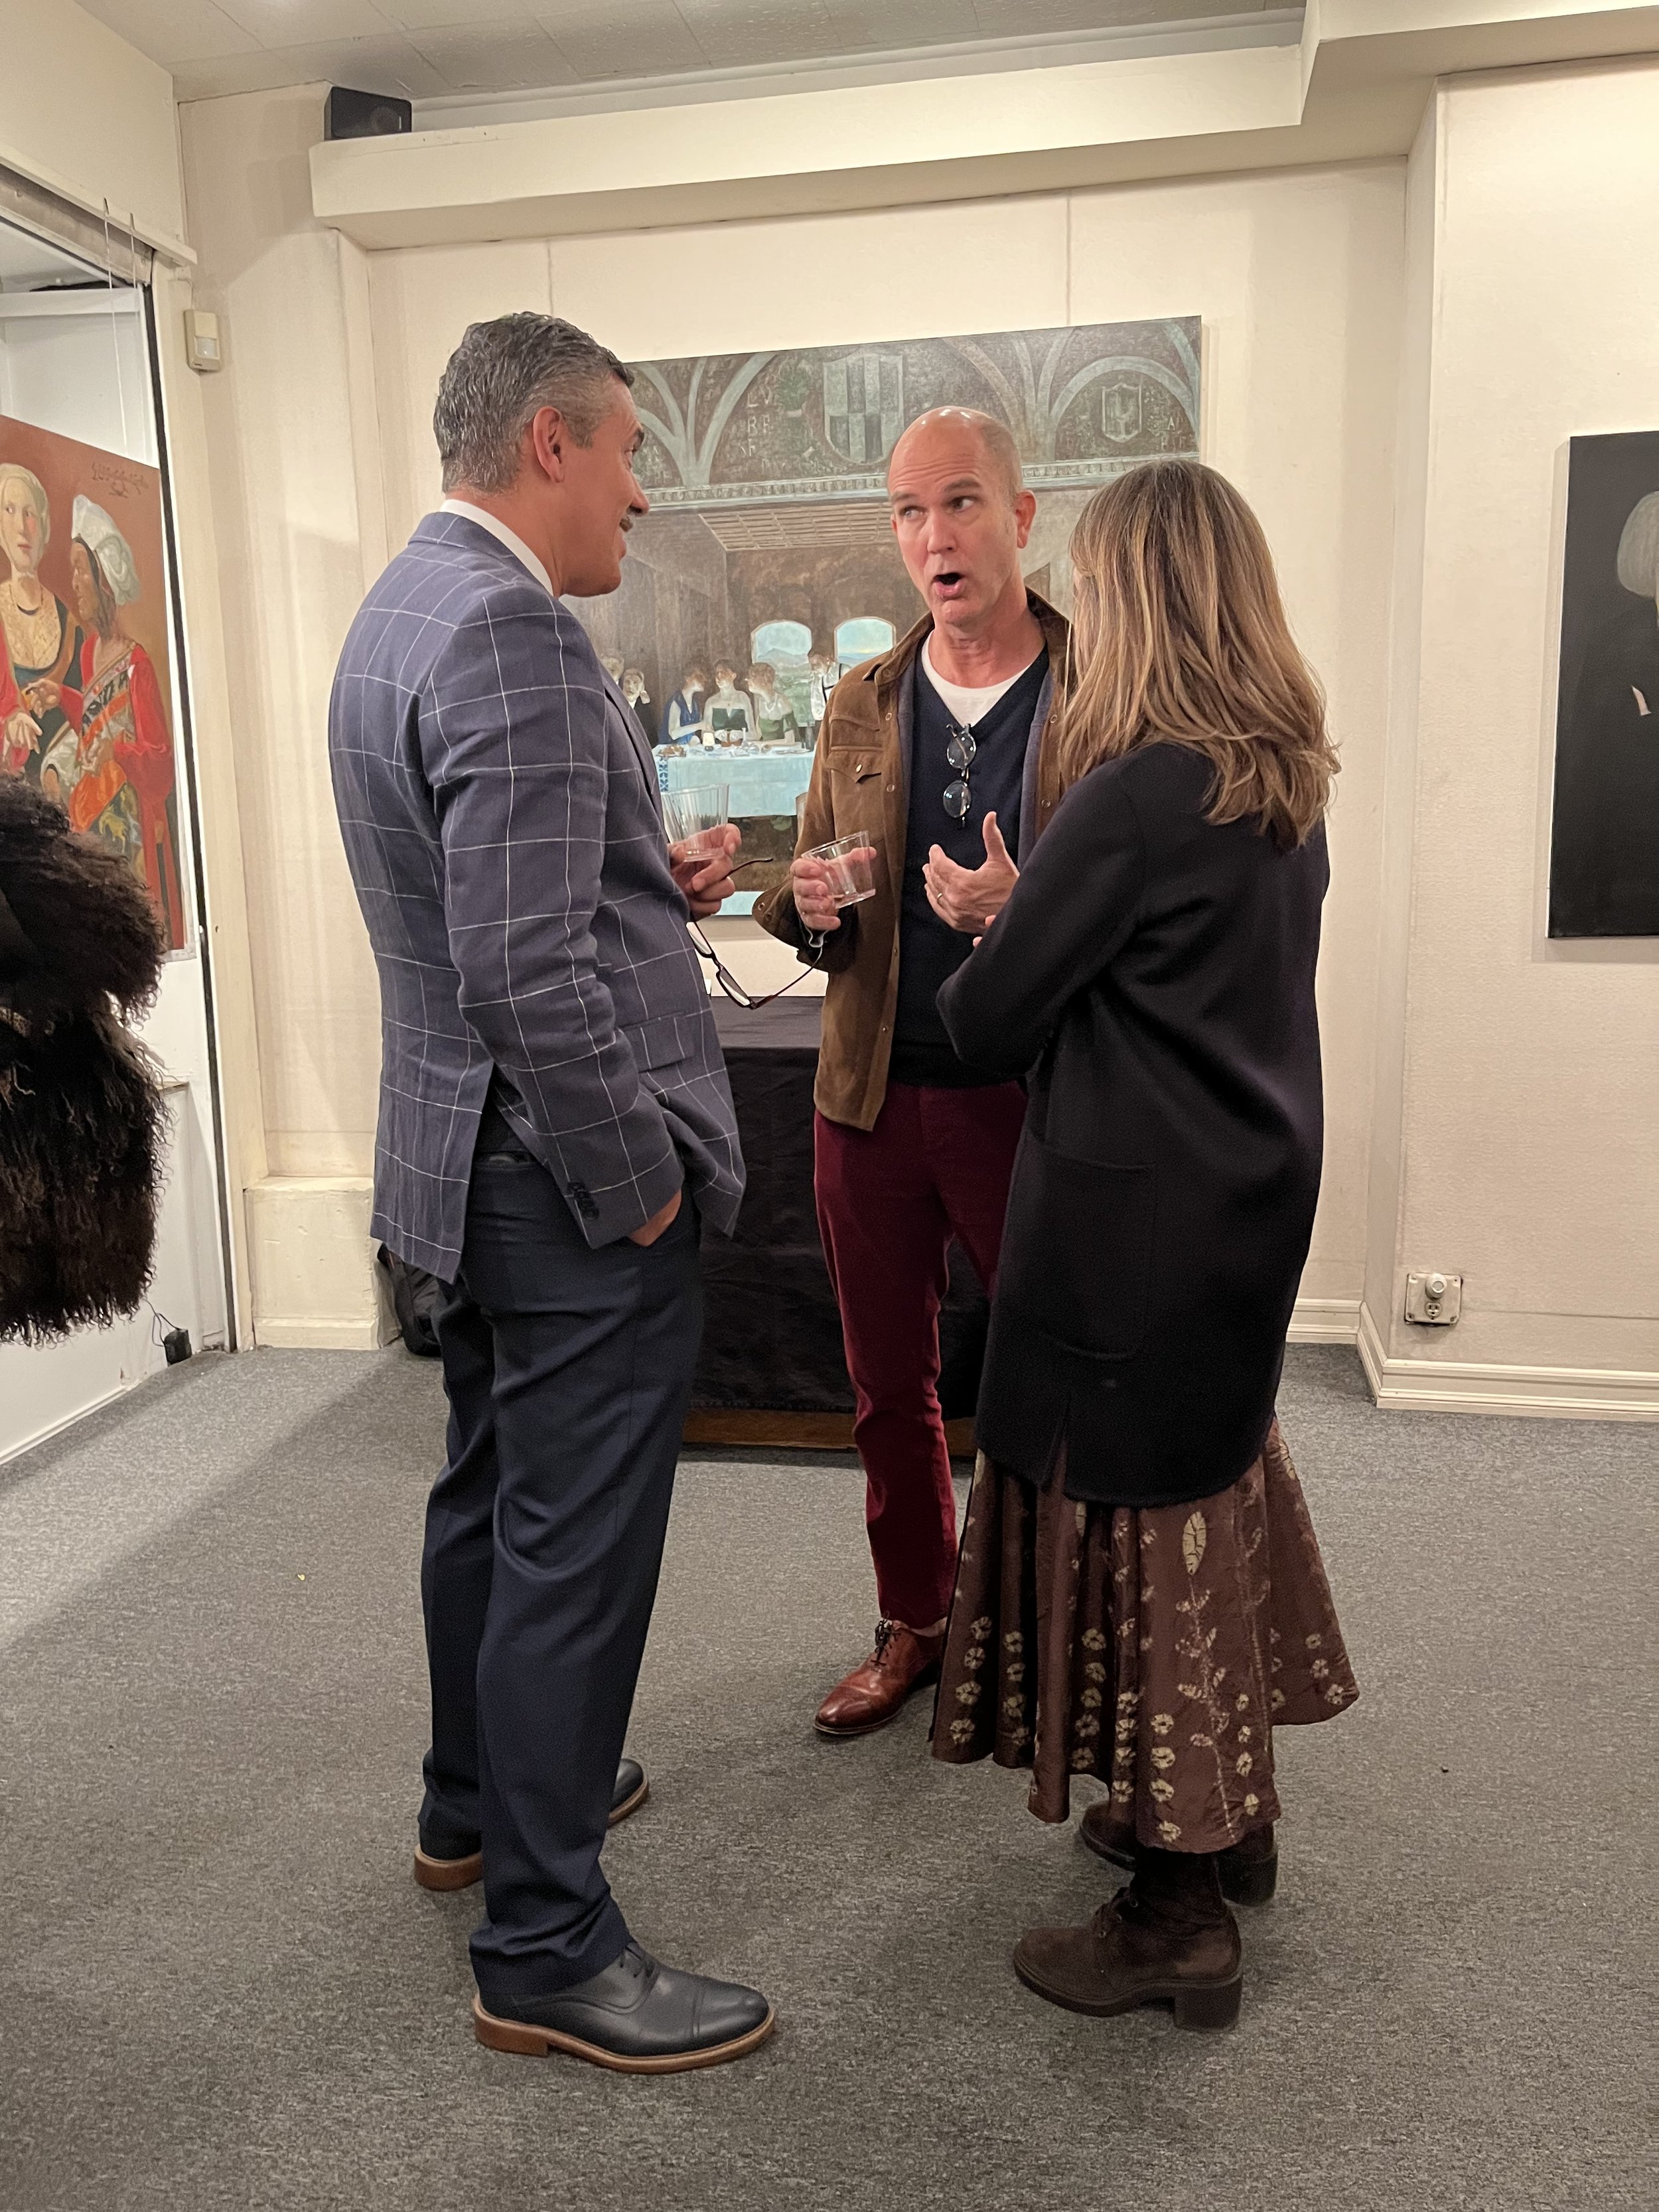 Gallerist Alfred González in dialogue with collectors.